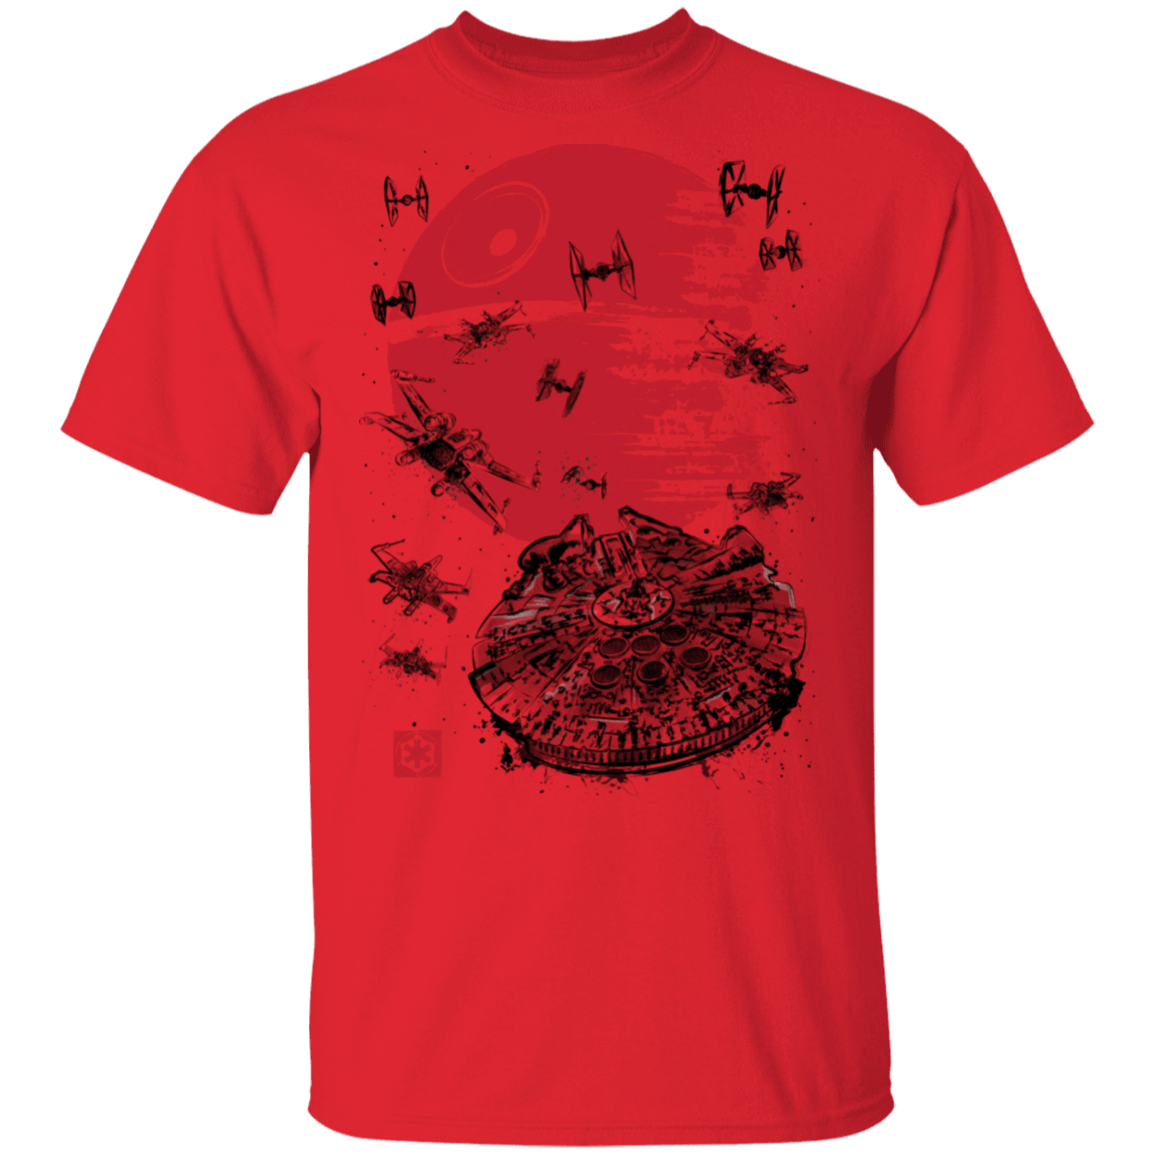 T-Shirts Red / S Battle of Endor T-Shirt